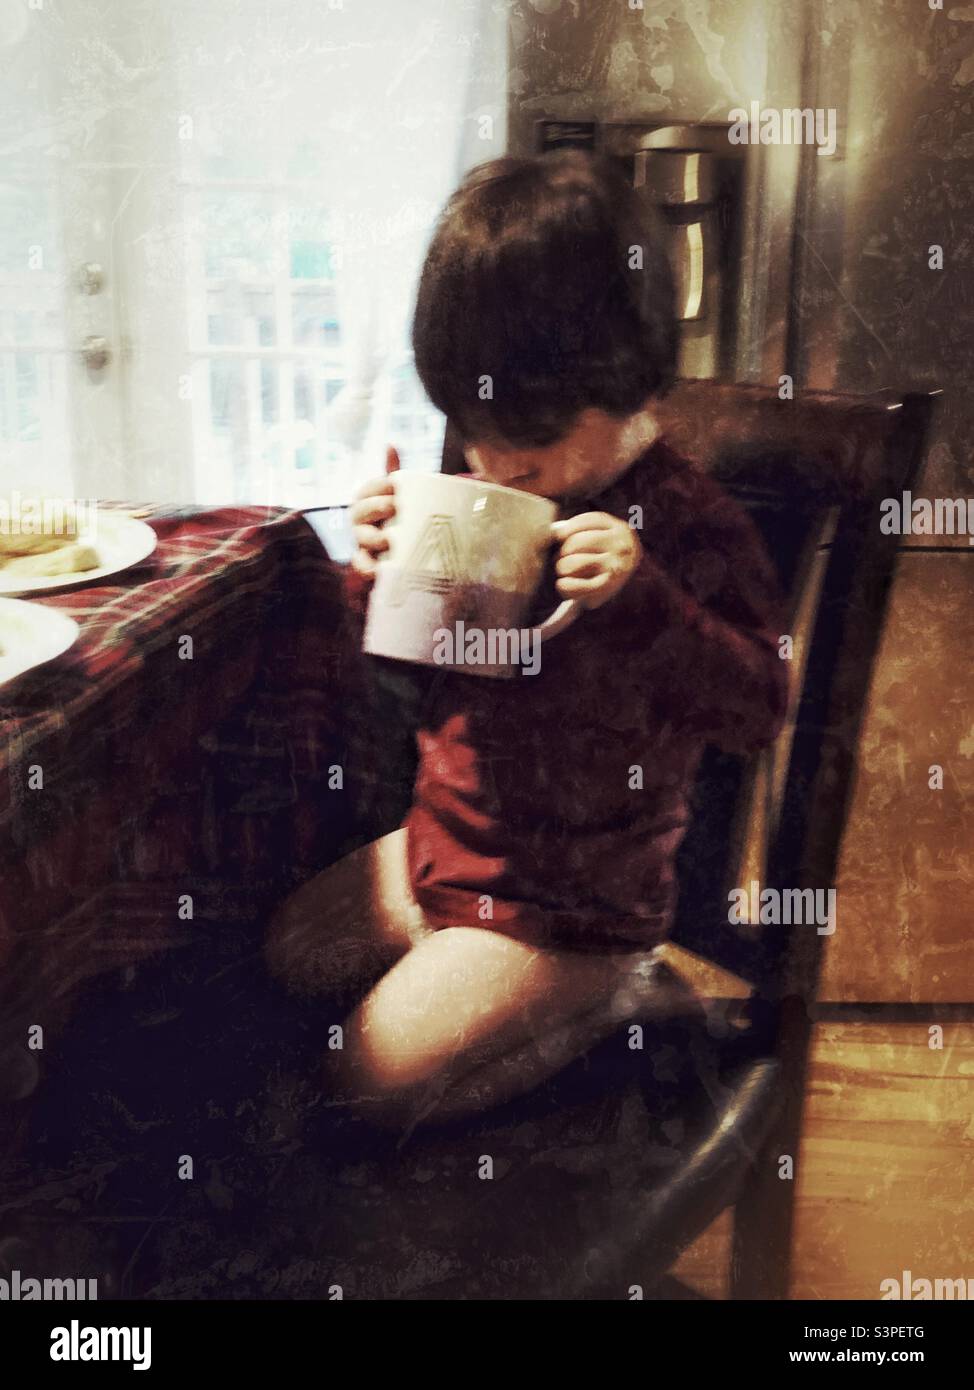 Toddler testing mommy’s coffee Stock Photo